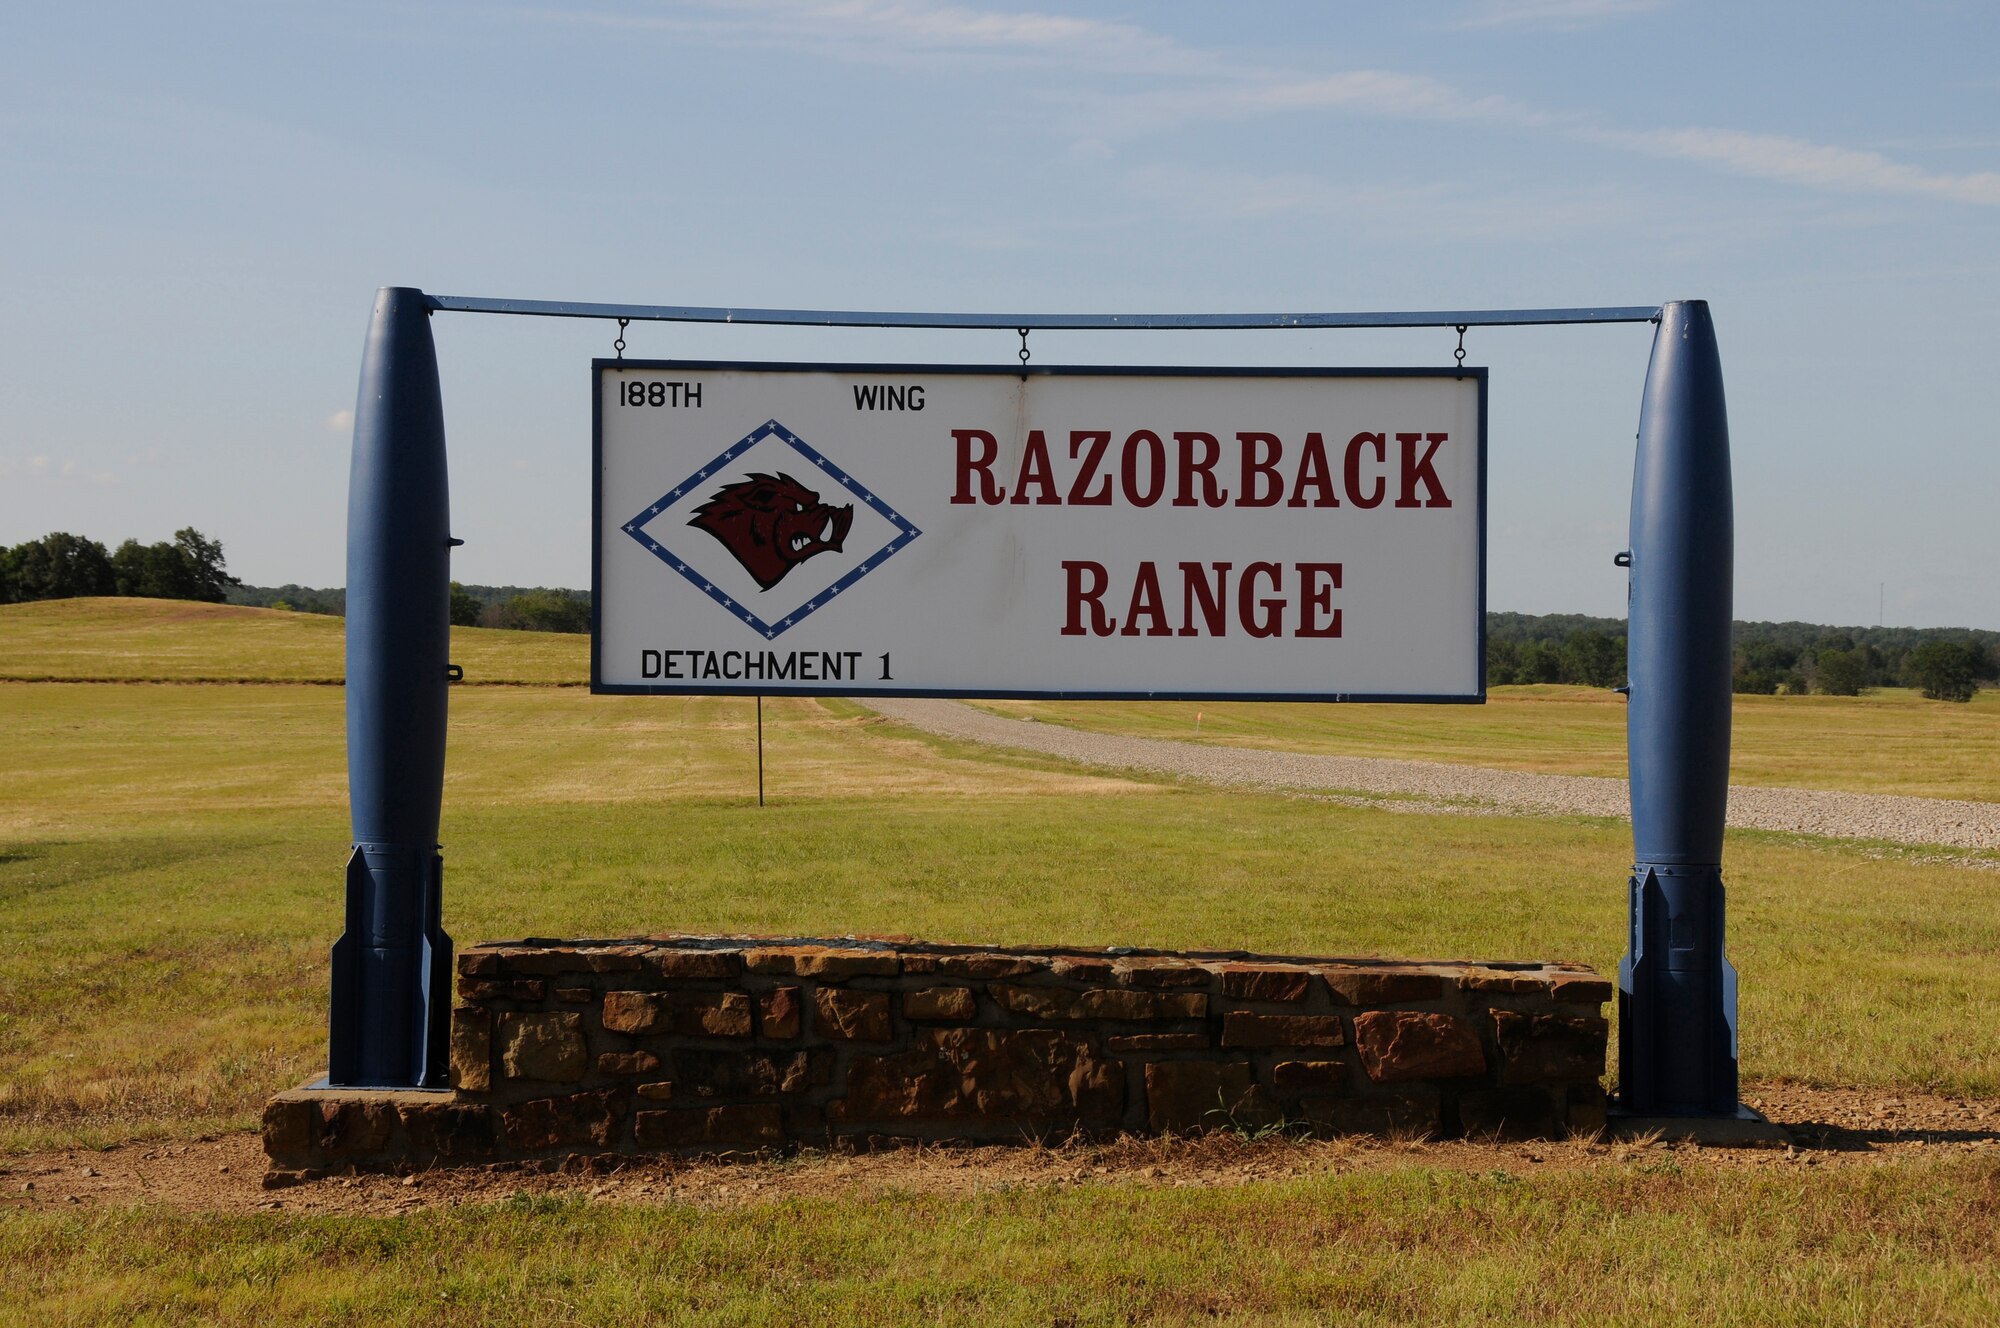 Pictured is the signage at 188th Wing Detachment 1 Razorback Range at Fort Chaffee Maneuver Training Center, Arkansas. The range is maintained by the 188th and provides varying types of training to military units from around the world. That includes close-air support training with joint terminal attack controllers. Razorback Range celebrates 40 years of operation in 2014. (U.S. Air National Guard photo illustration/Released).